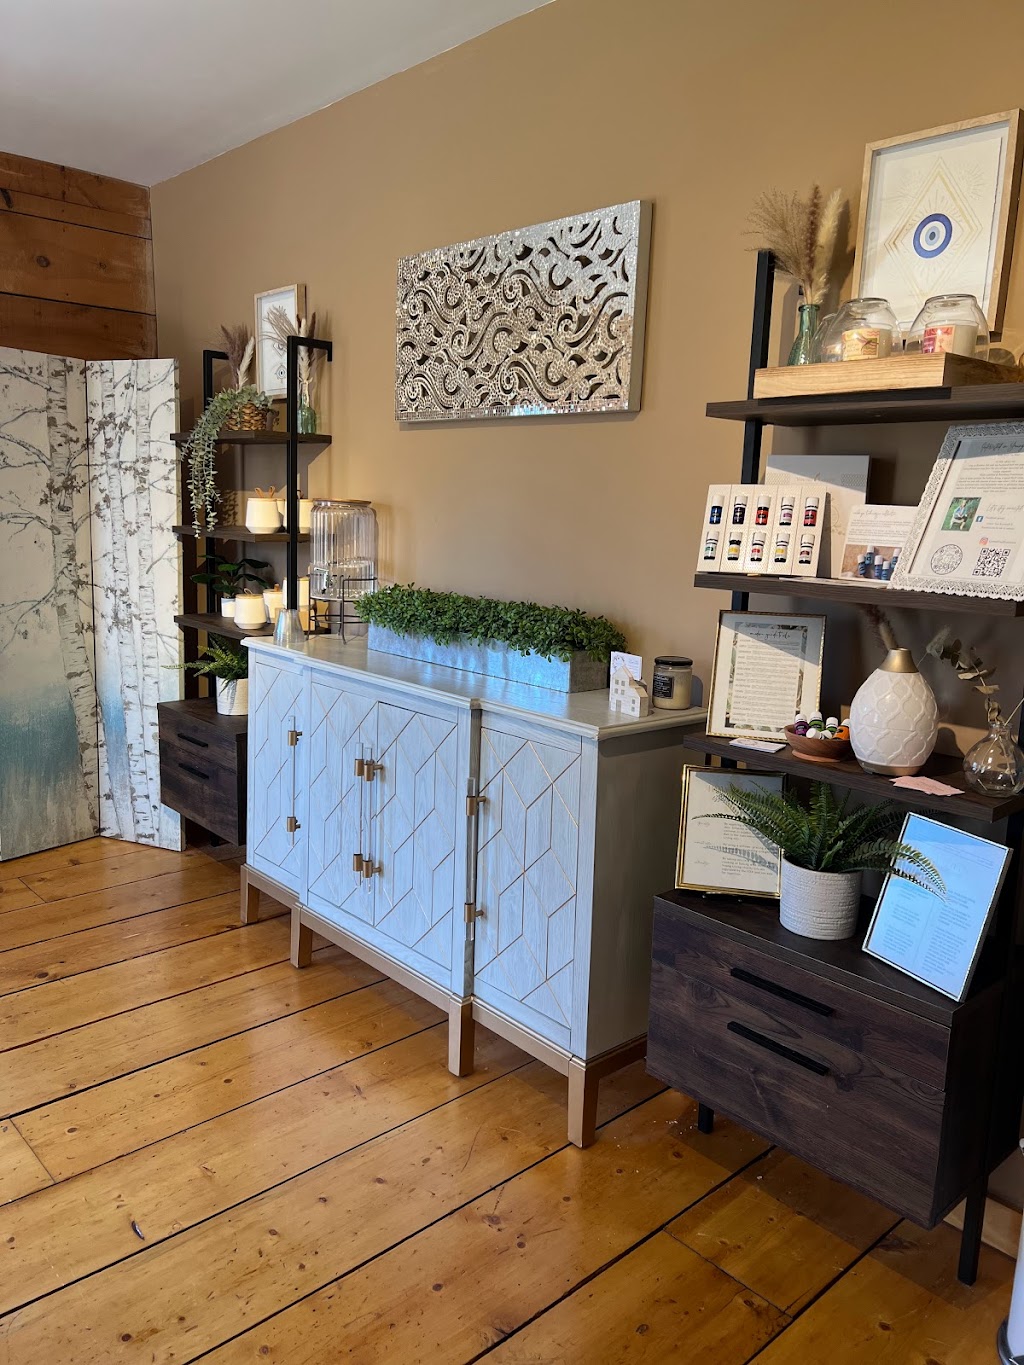 Unearth Loft Organic Spa & Lifestyle Boutique | 4010 W Skippack Pike Suite 4, Skippack, PA 19474 | Phone: (484) 854-1154